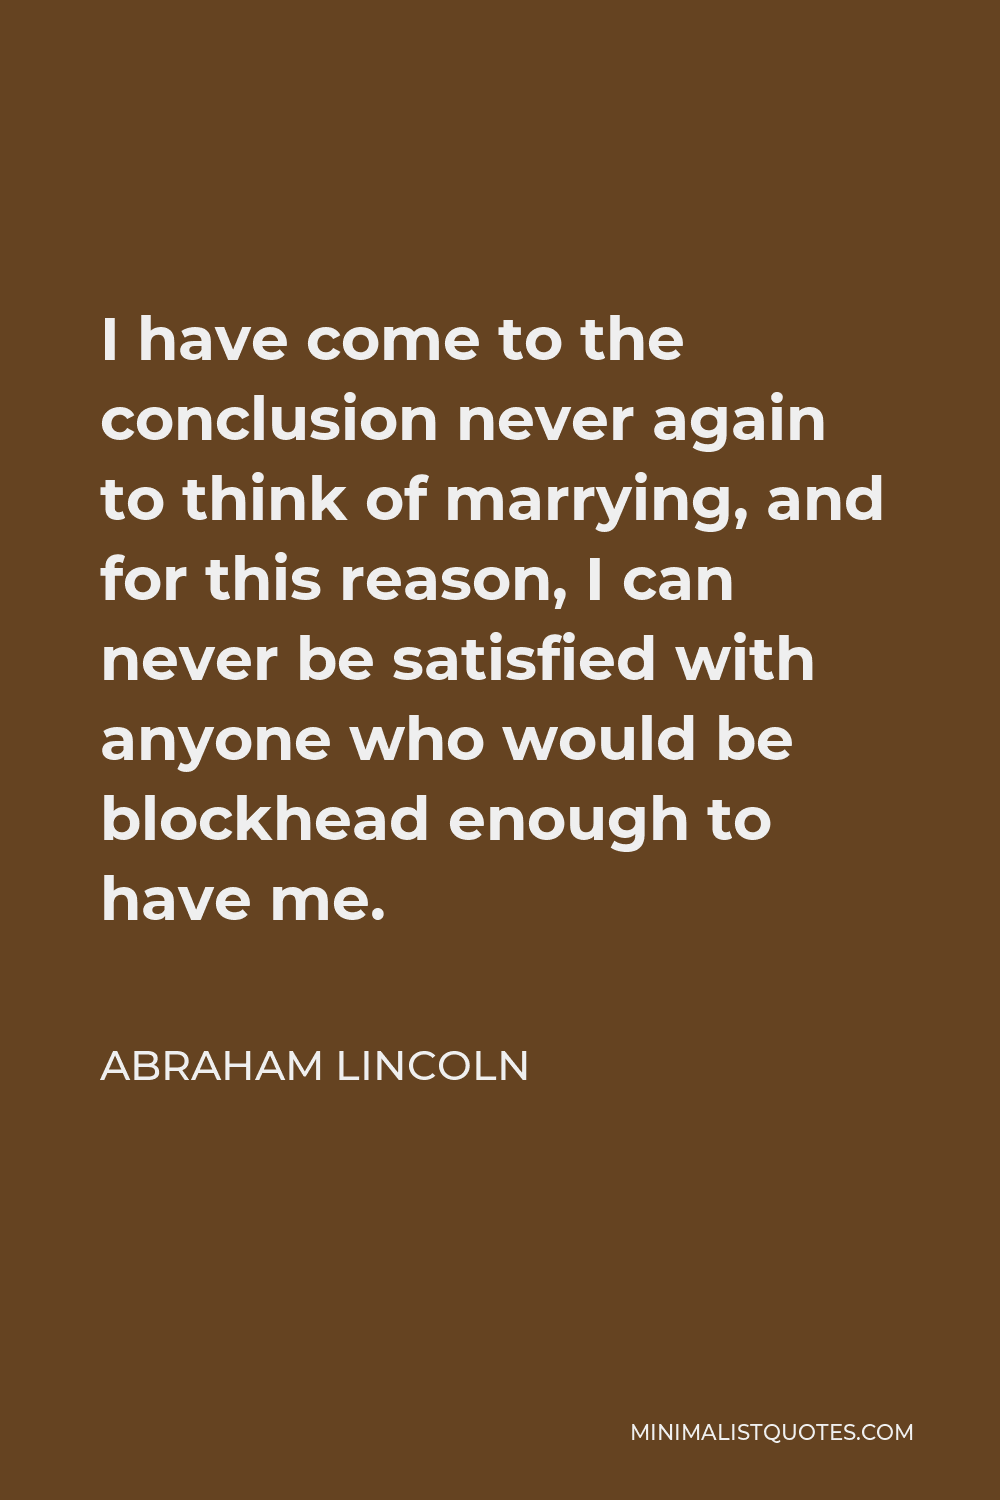 Abraham Lincoln Quote - I have come to the conclusion never again to think of marrying, and for this reason, I can never be satisfied with anyone who would be blockhead enough to have me.